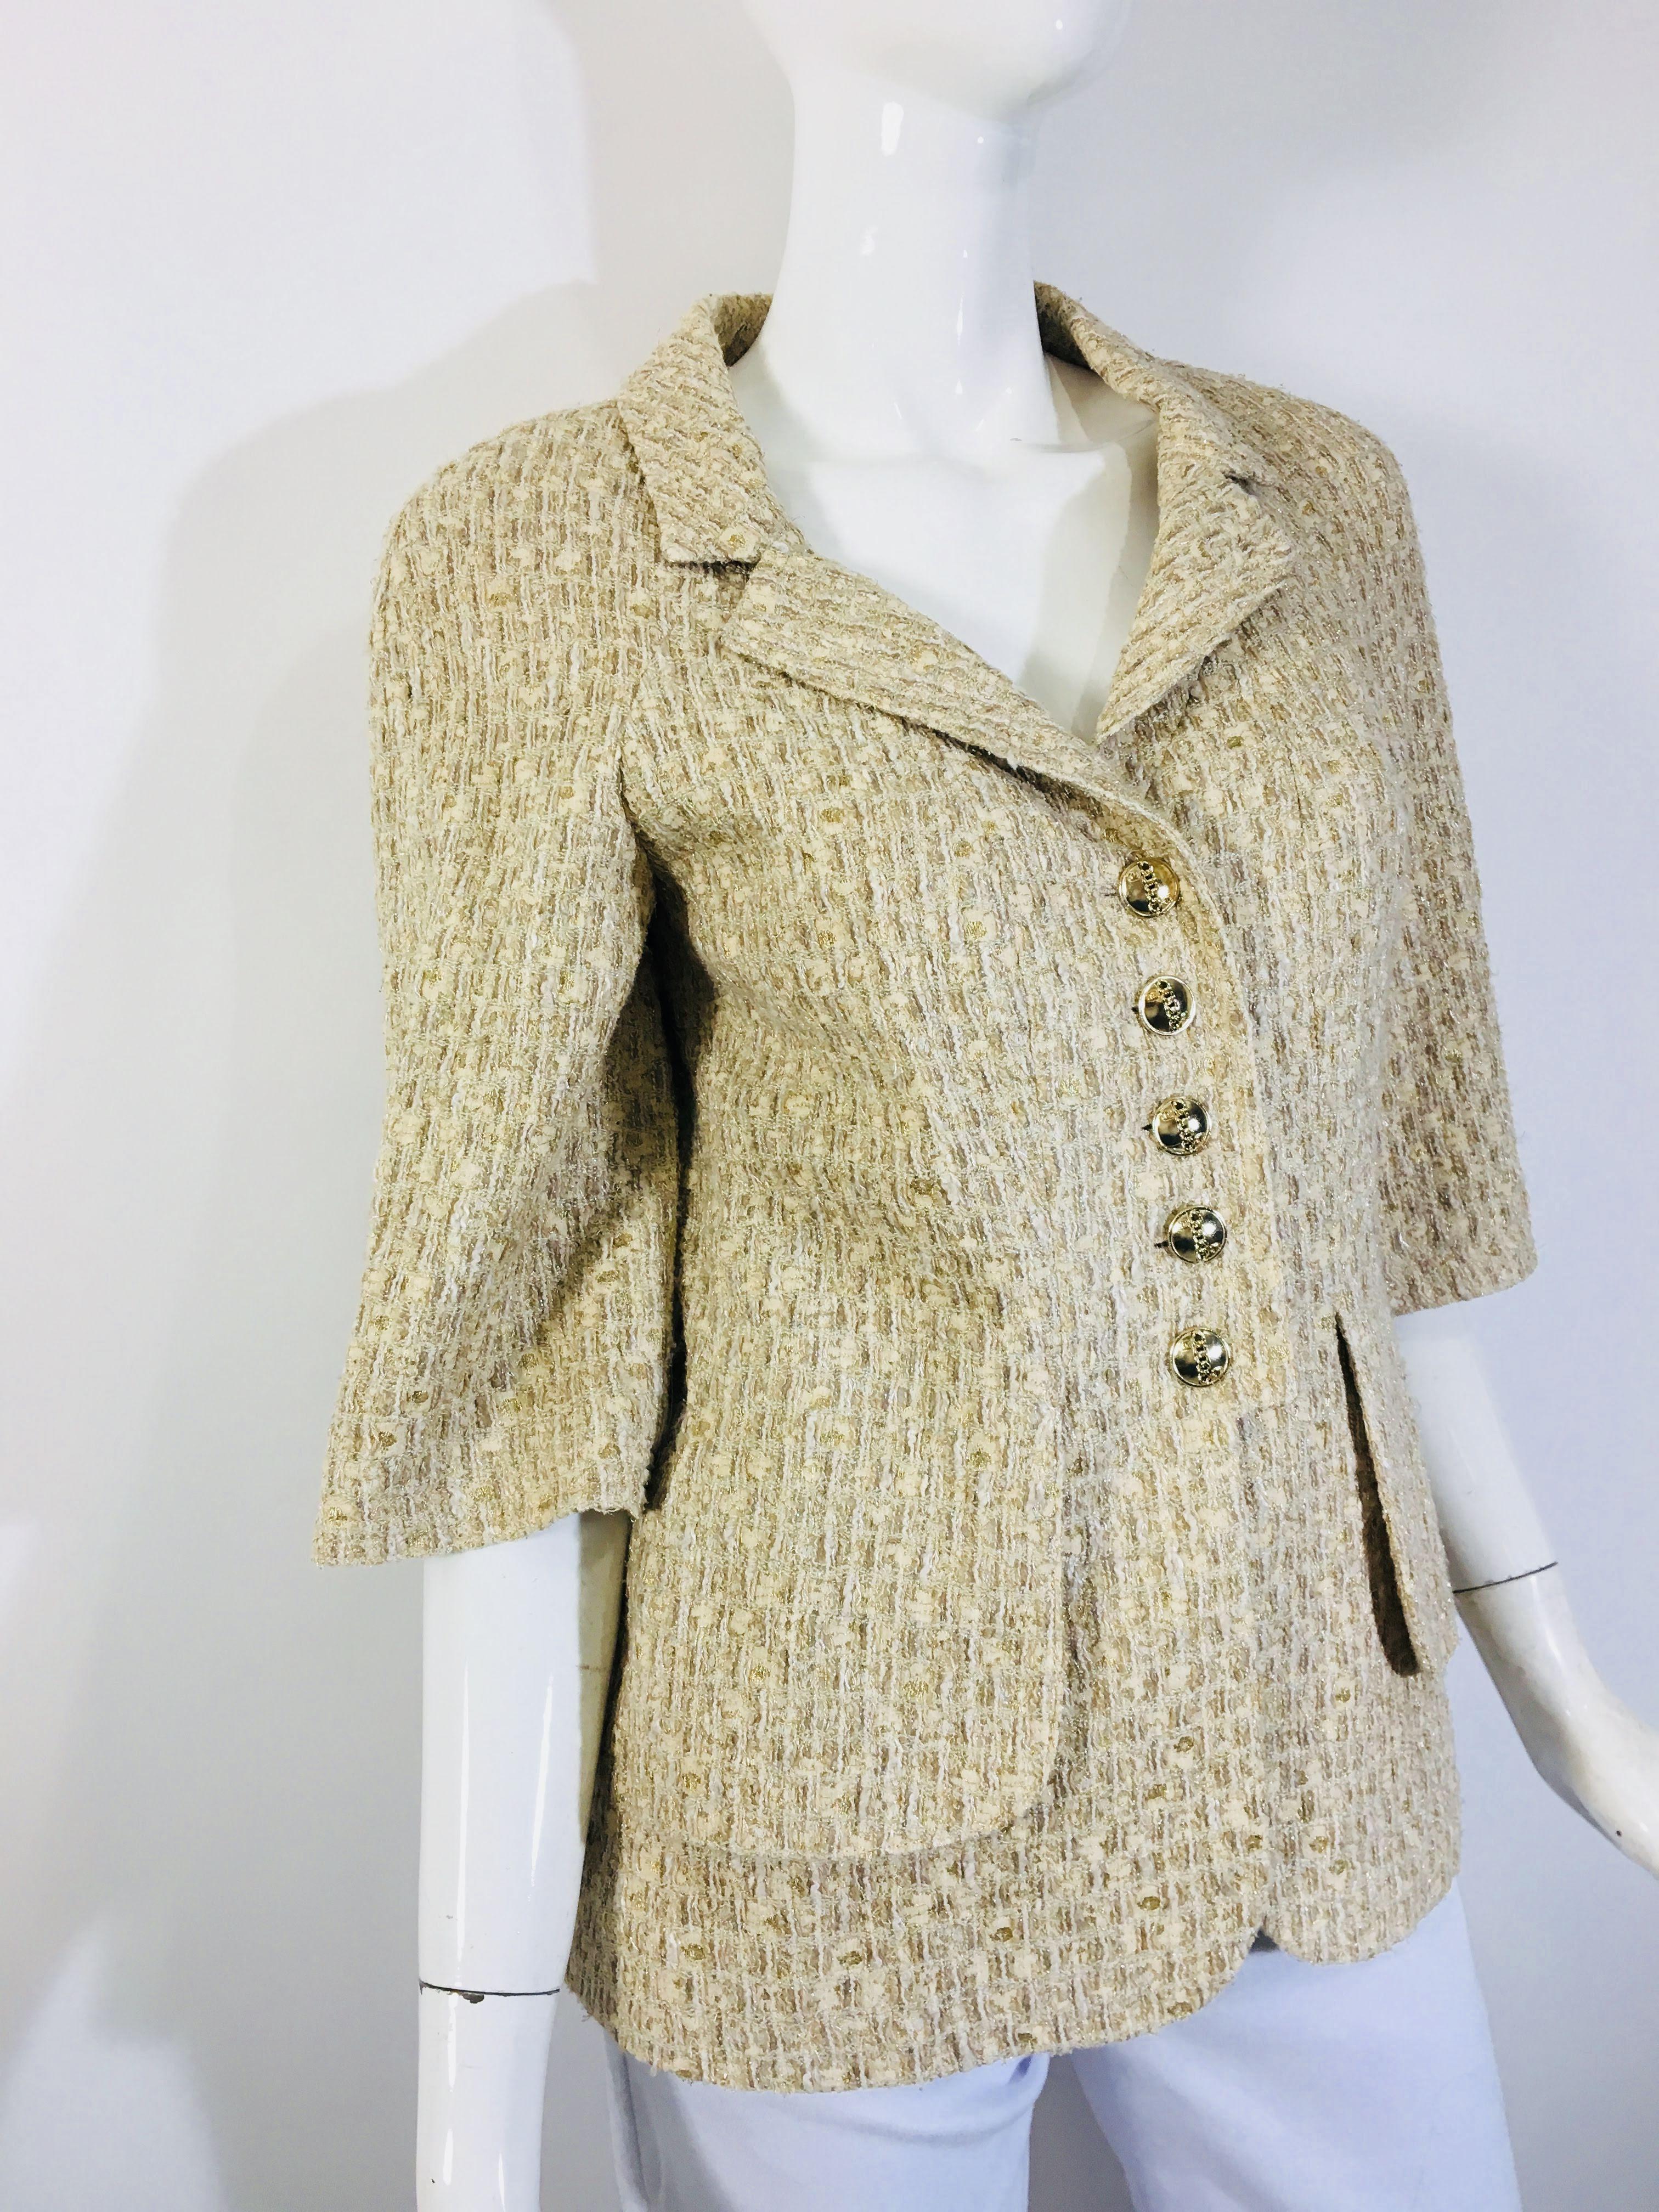 Chanel 5 Button Boucle Jacket in Cream Tweed
Gold Buttons with Chain Link Detail and Chanel Logo
3/4 Sleeve
Collar and Two Front Pockets
Made in France, 2007
Size 40